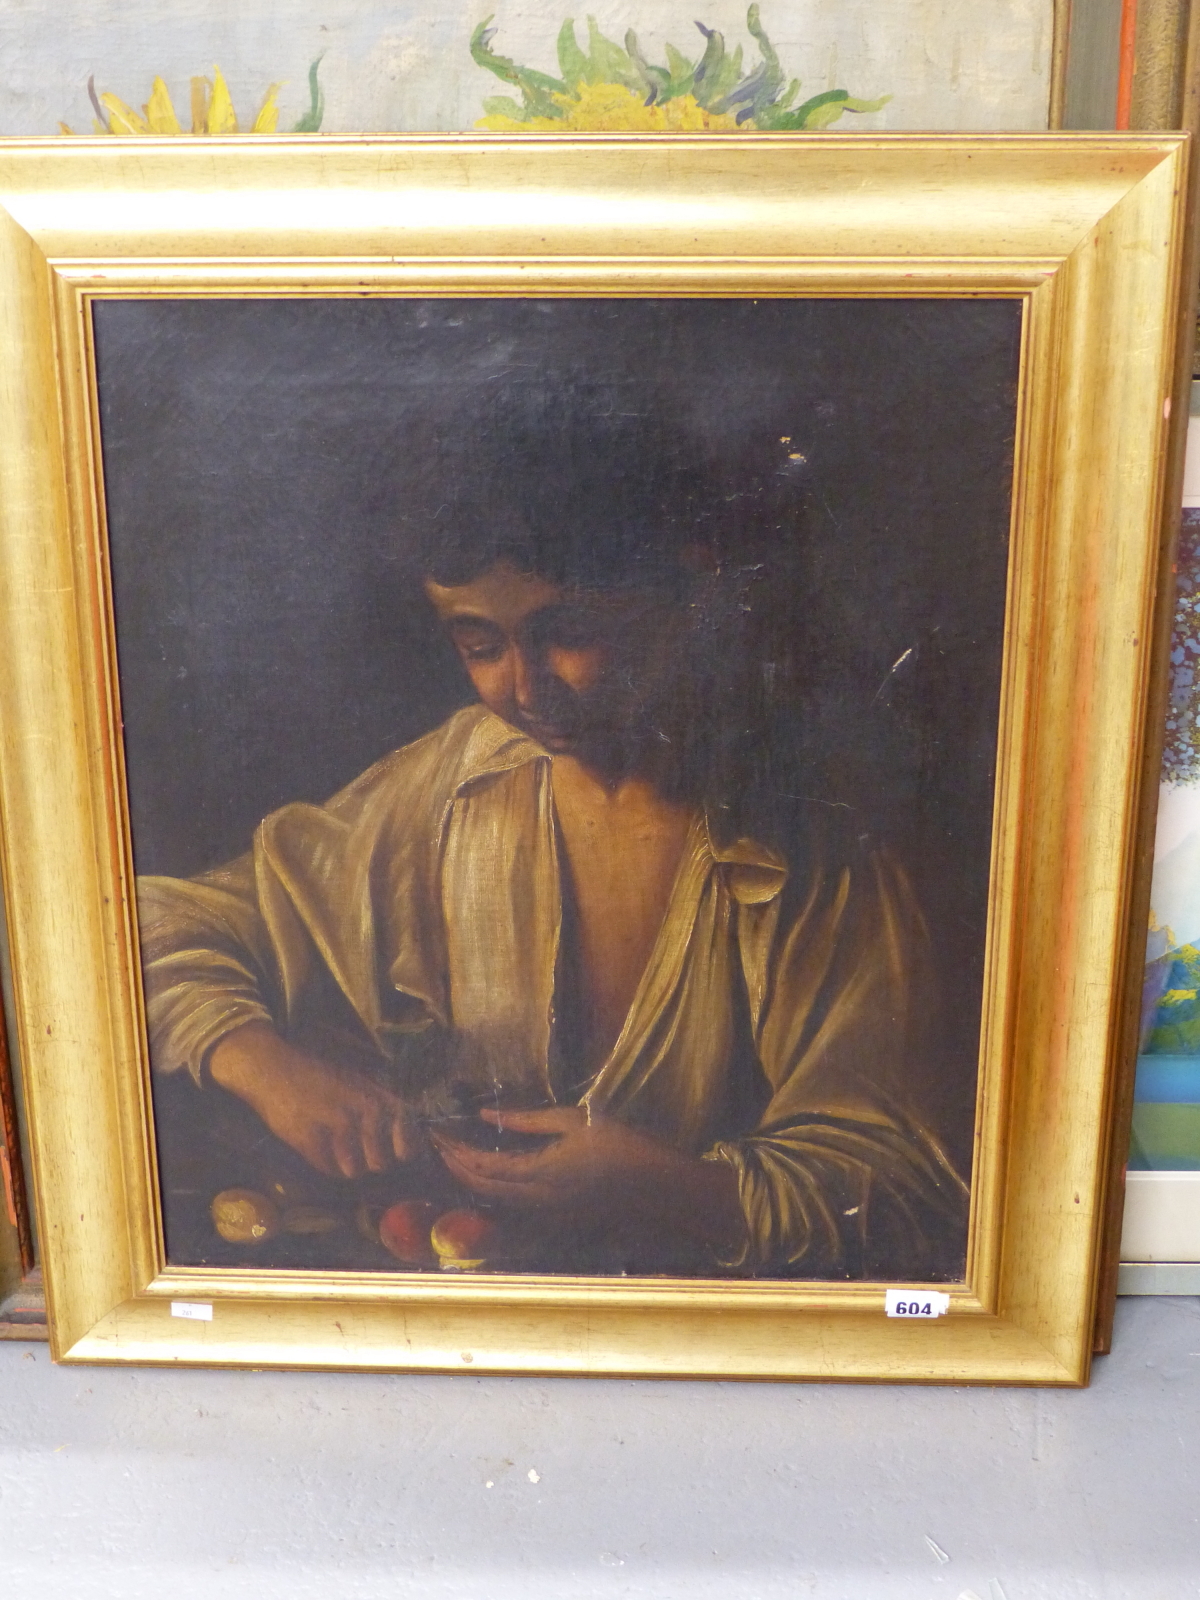 AFTER THE OLD MASTERS. (EARLY 19th CENTURY) A YOUNG MAN PEELING APPLES. OIL ON CANVAS 50 X 60 cm. - Image 3 of 8